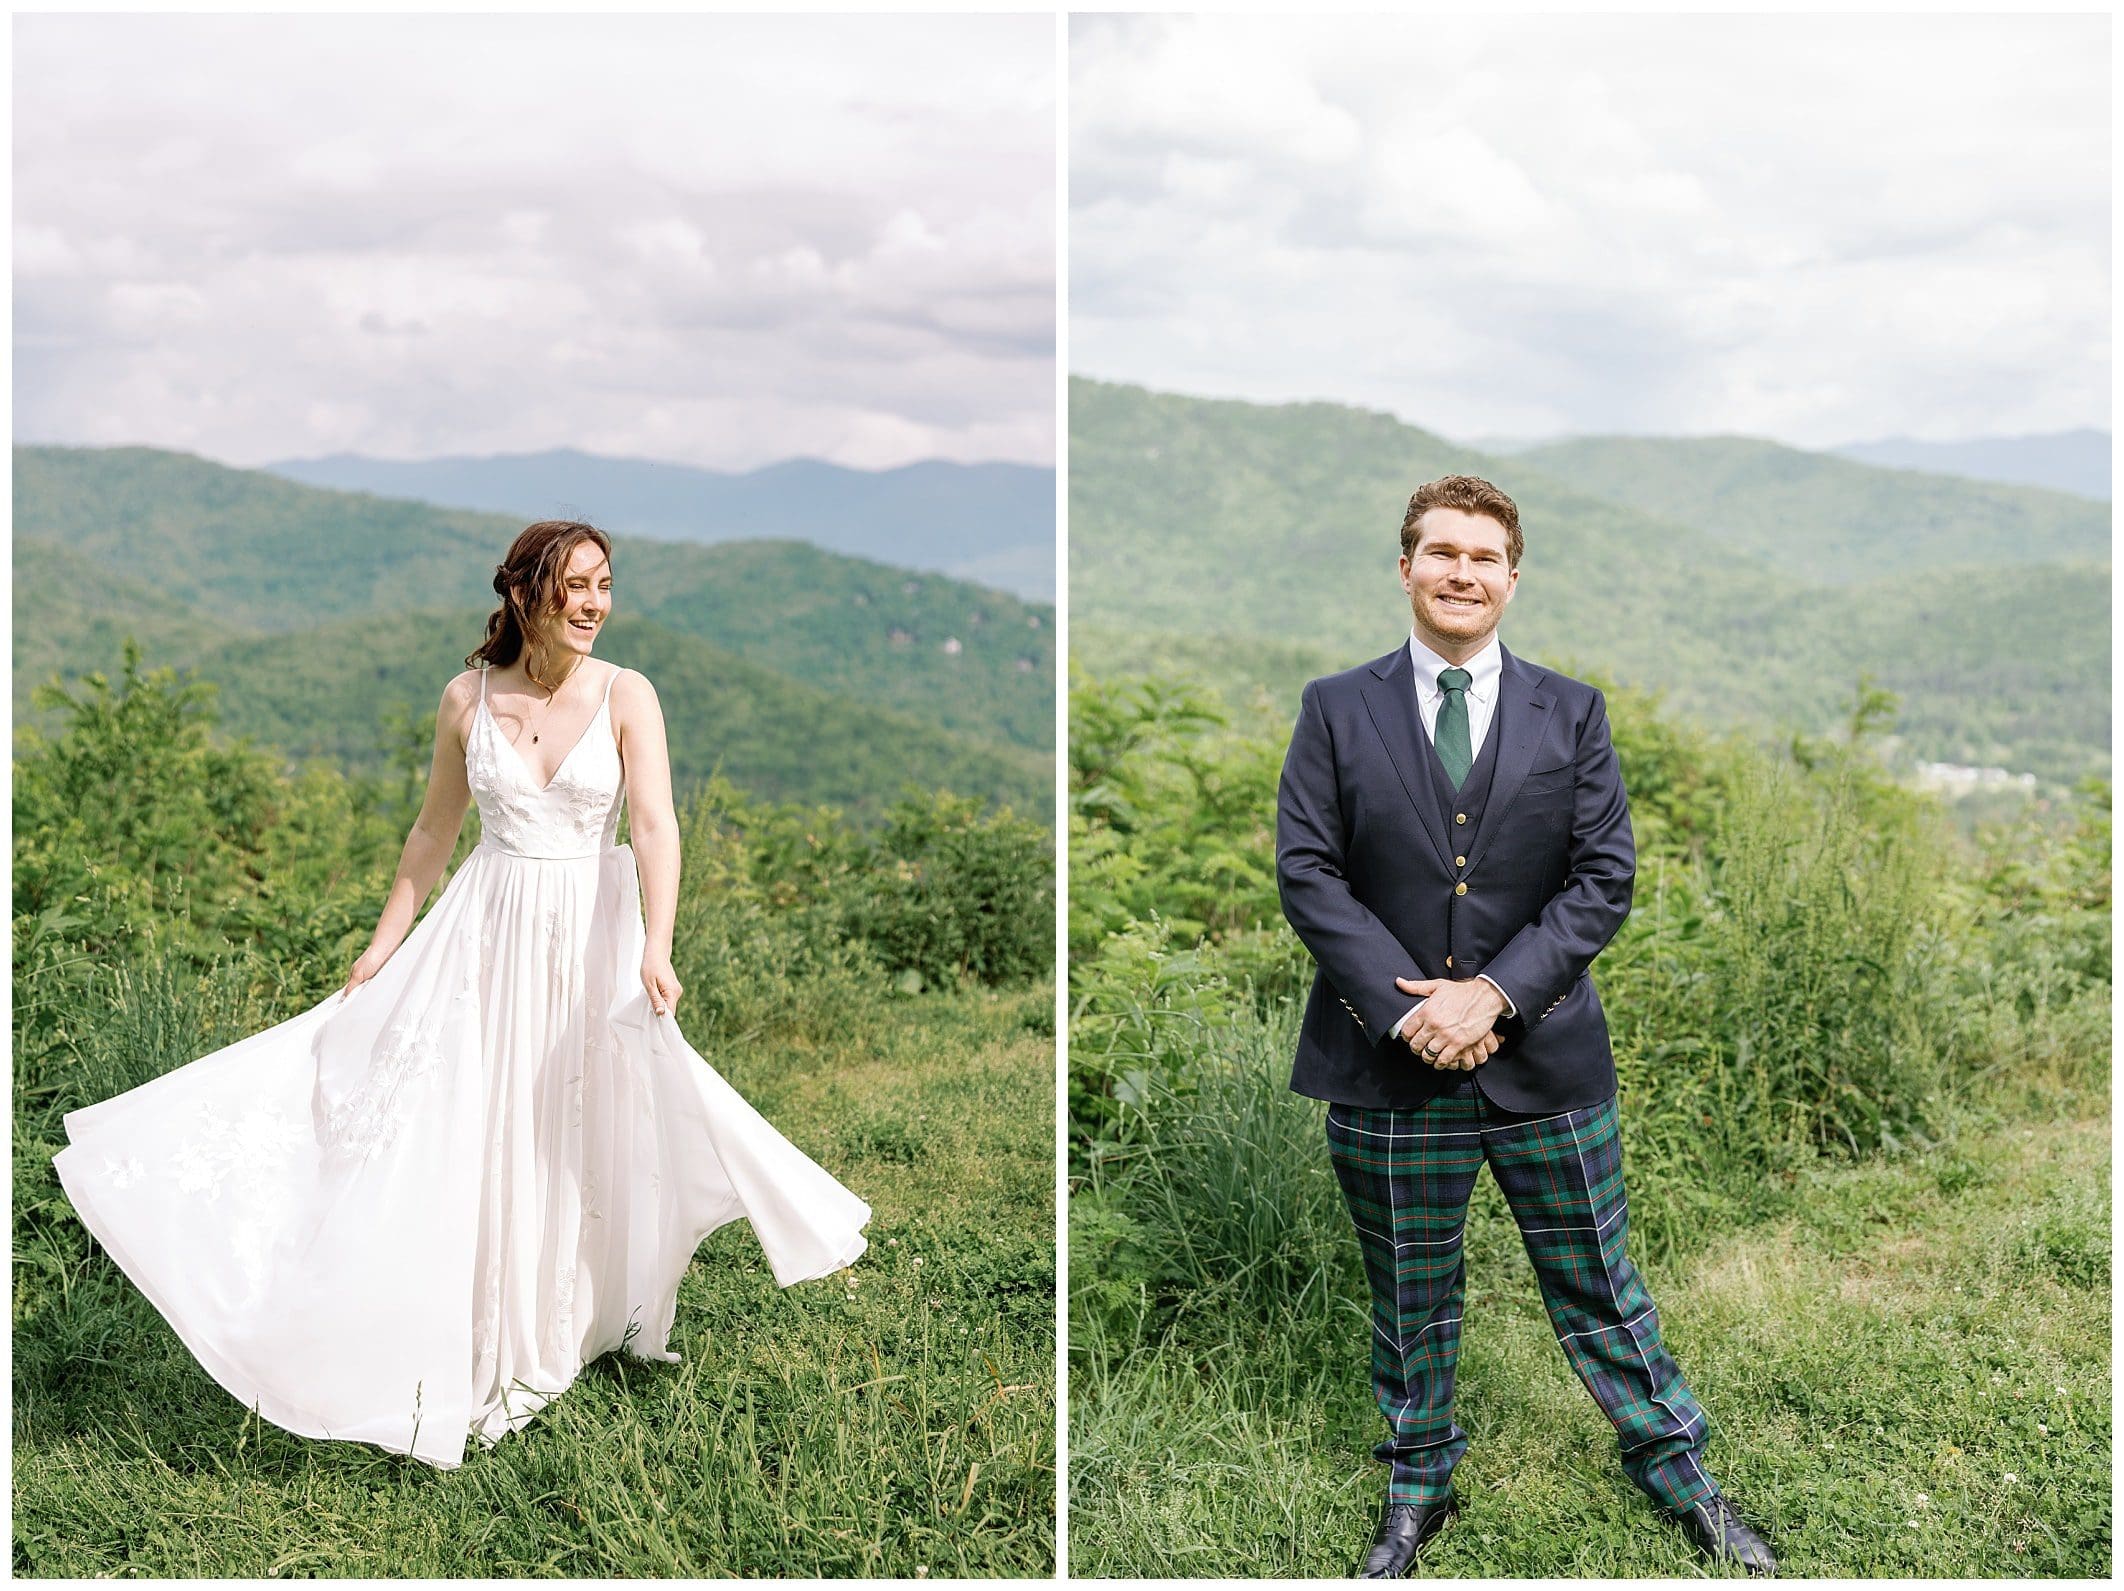 Blue Ridge Parkway Bride and Groom portraits by Kathy Beaver 